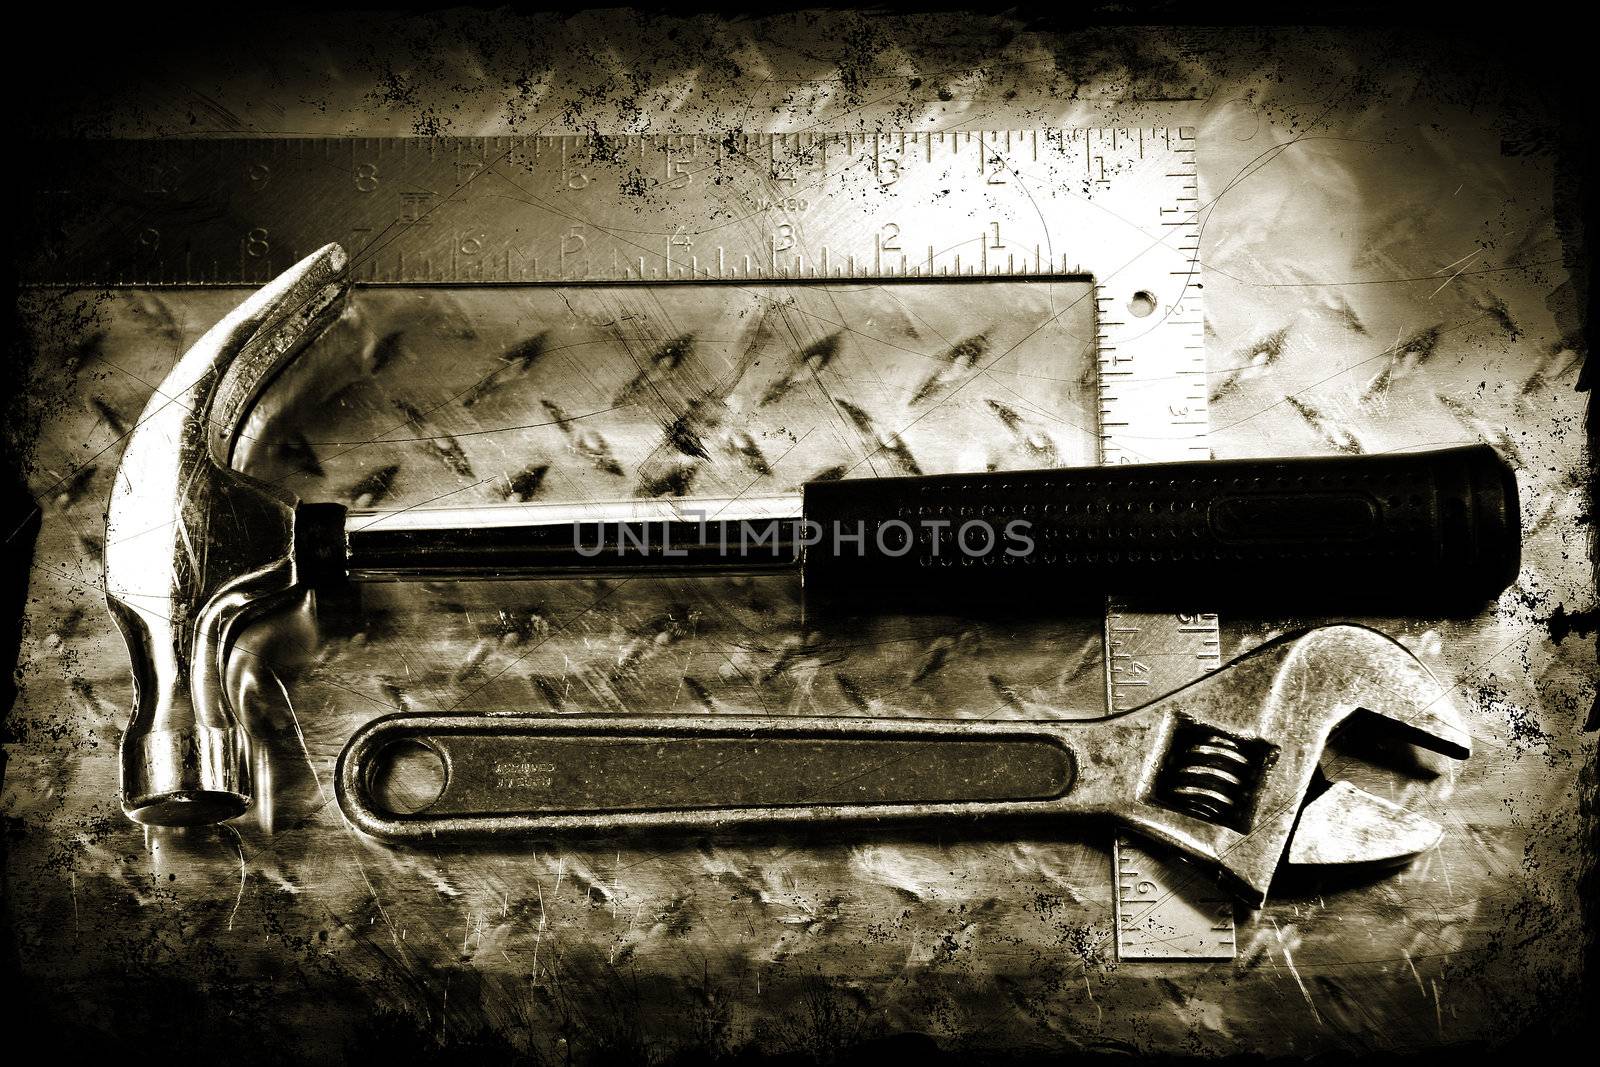 Grunge work tools by Sandralise